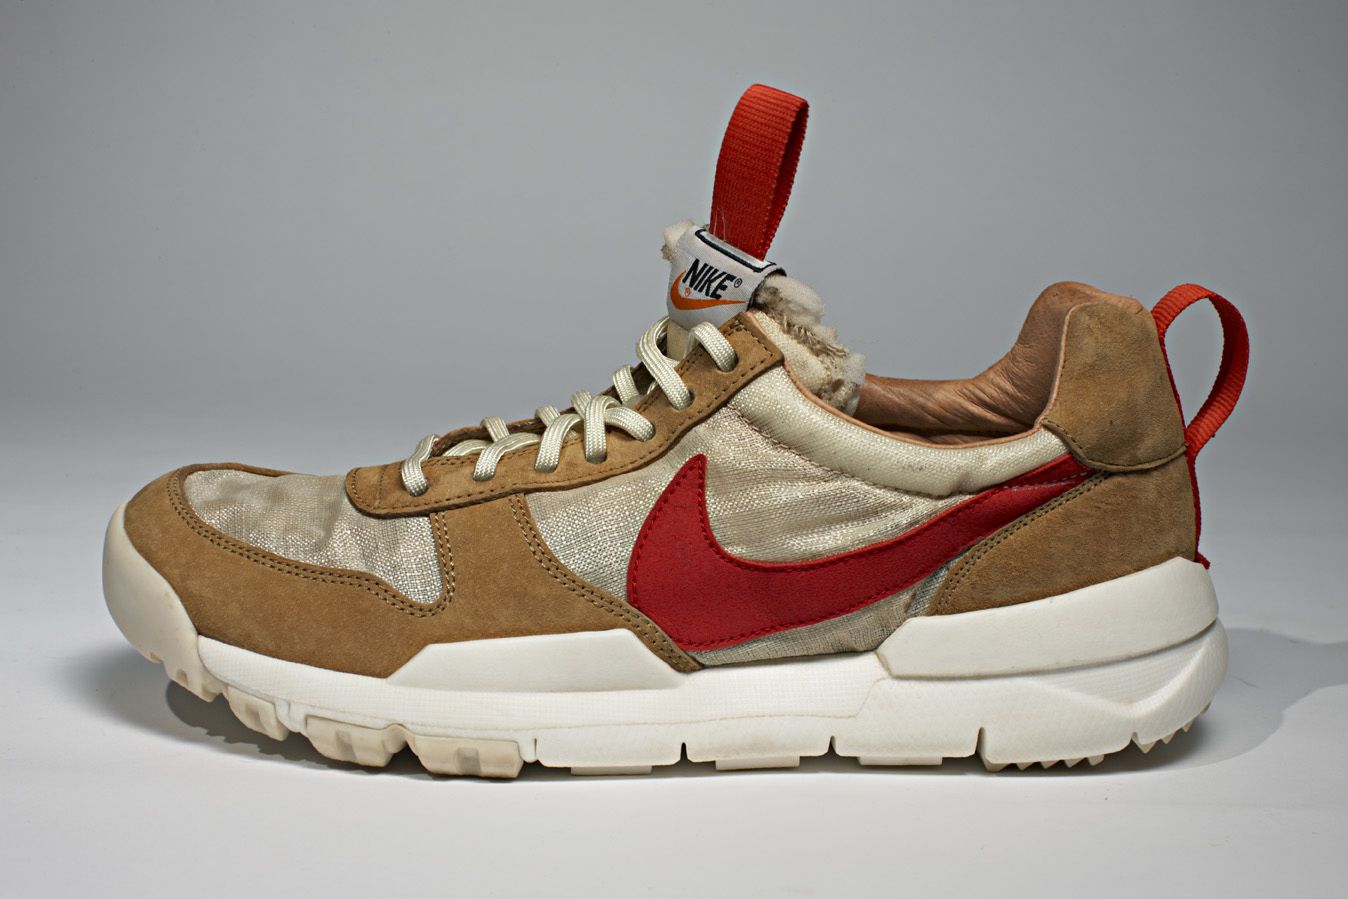 NIKECRAFT, TOM SACHS AND NIKE'S STORY